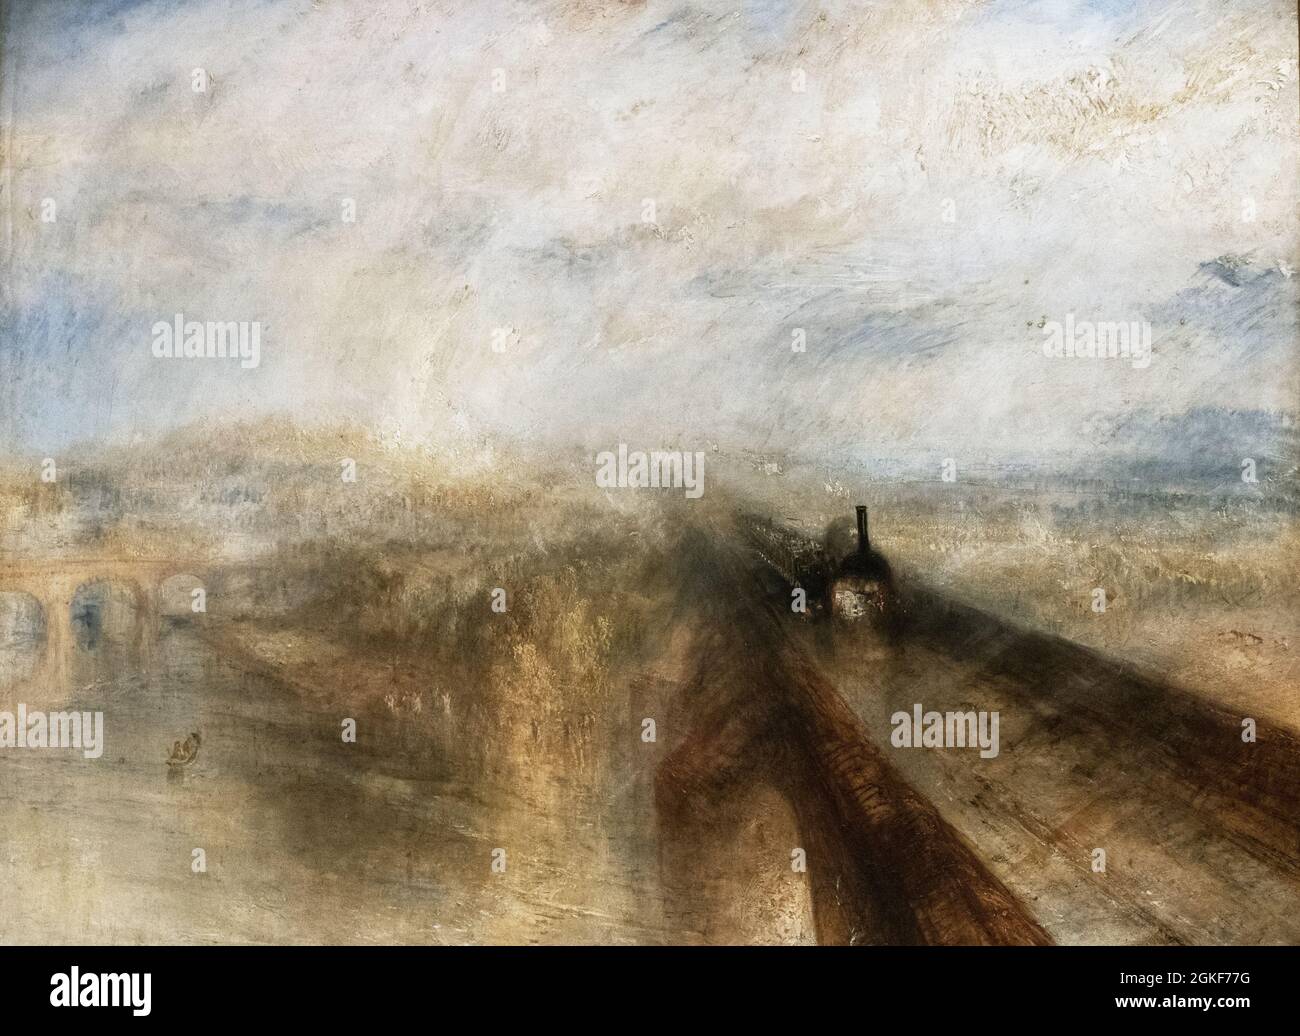 JMW Turner painting; 'Rain, Steam and Speed, The Great Western Railway' 1844; british Romantic art, 19th Century. Banque D'Images